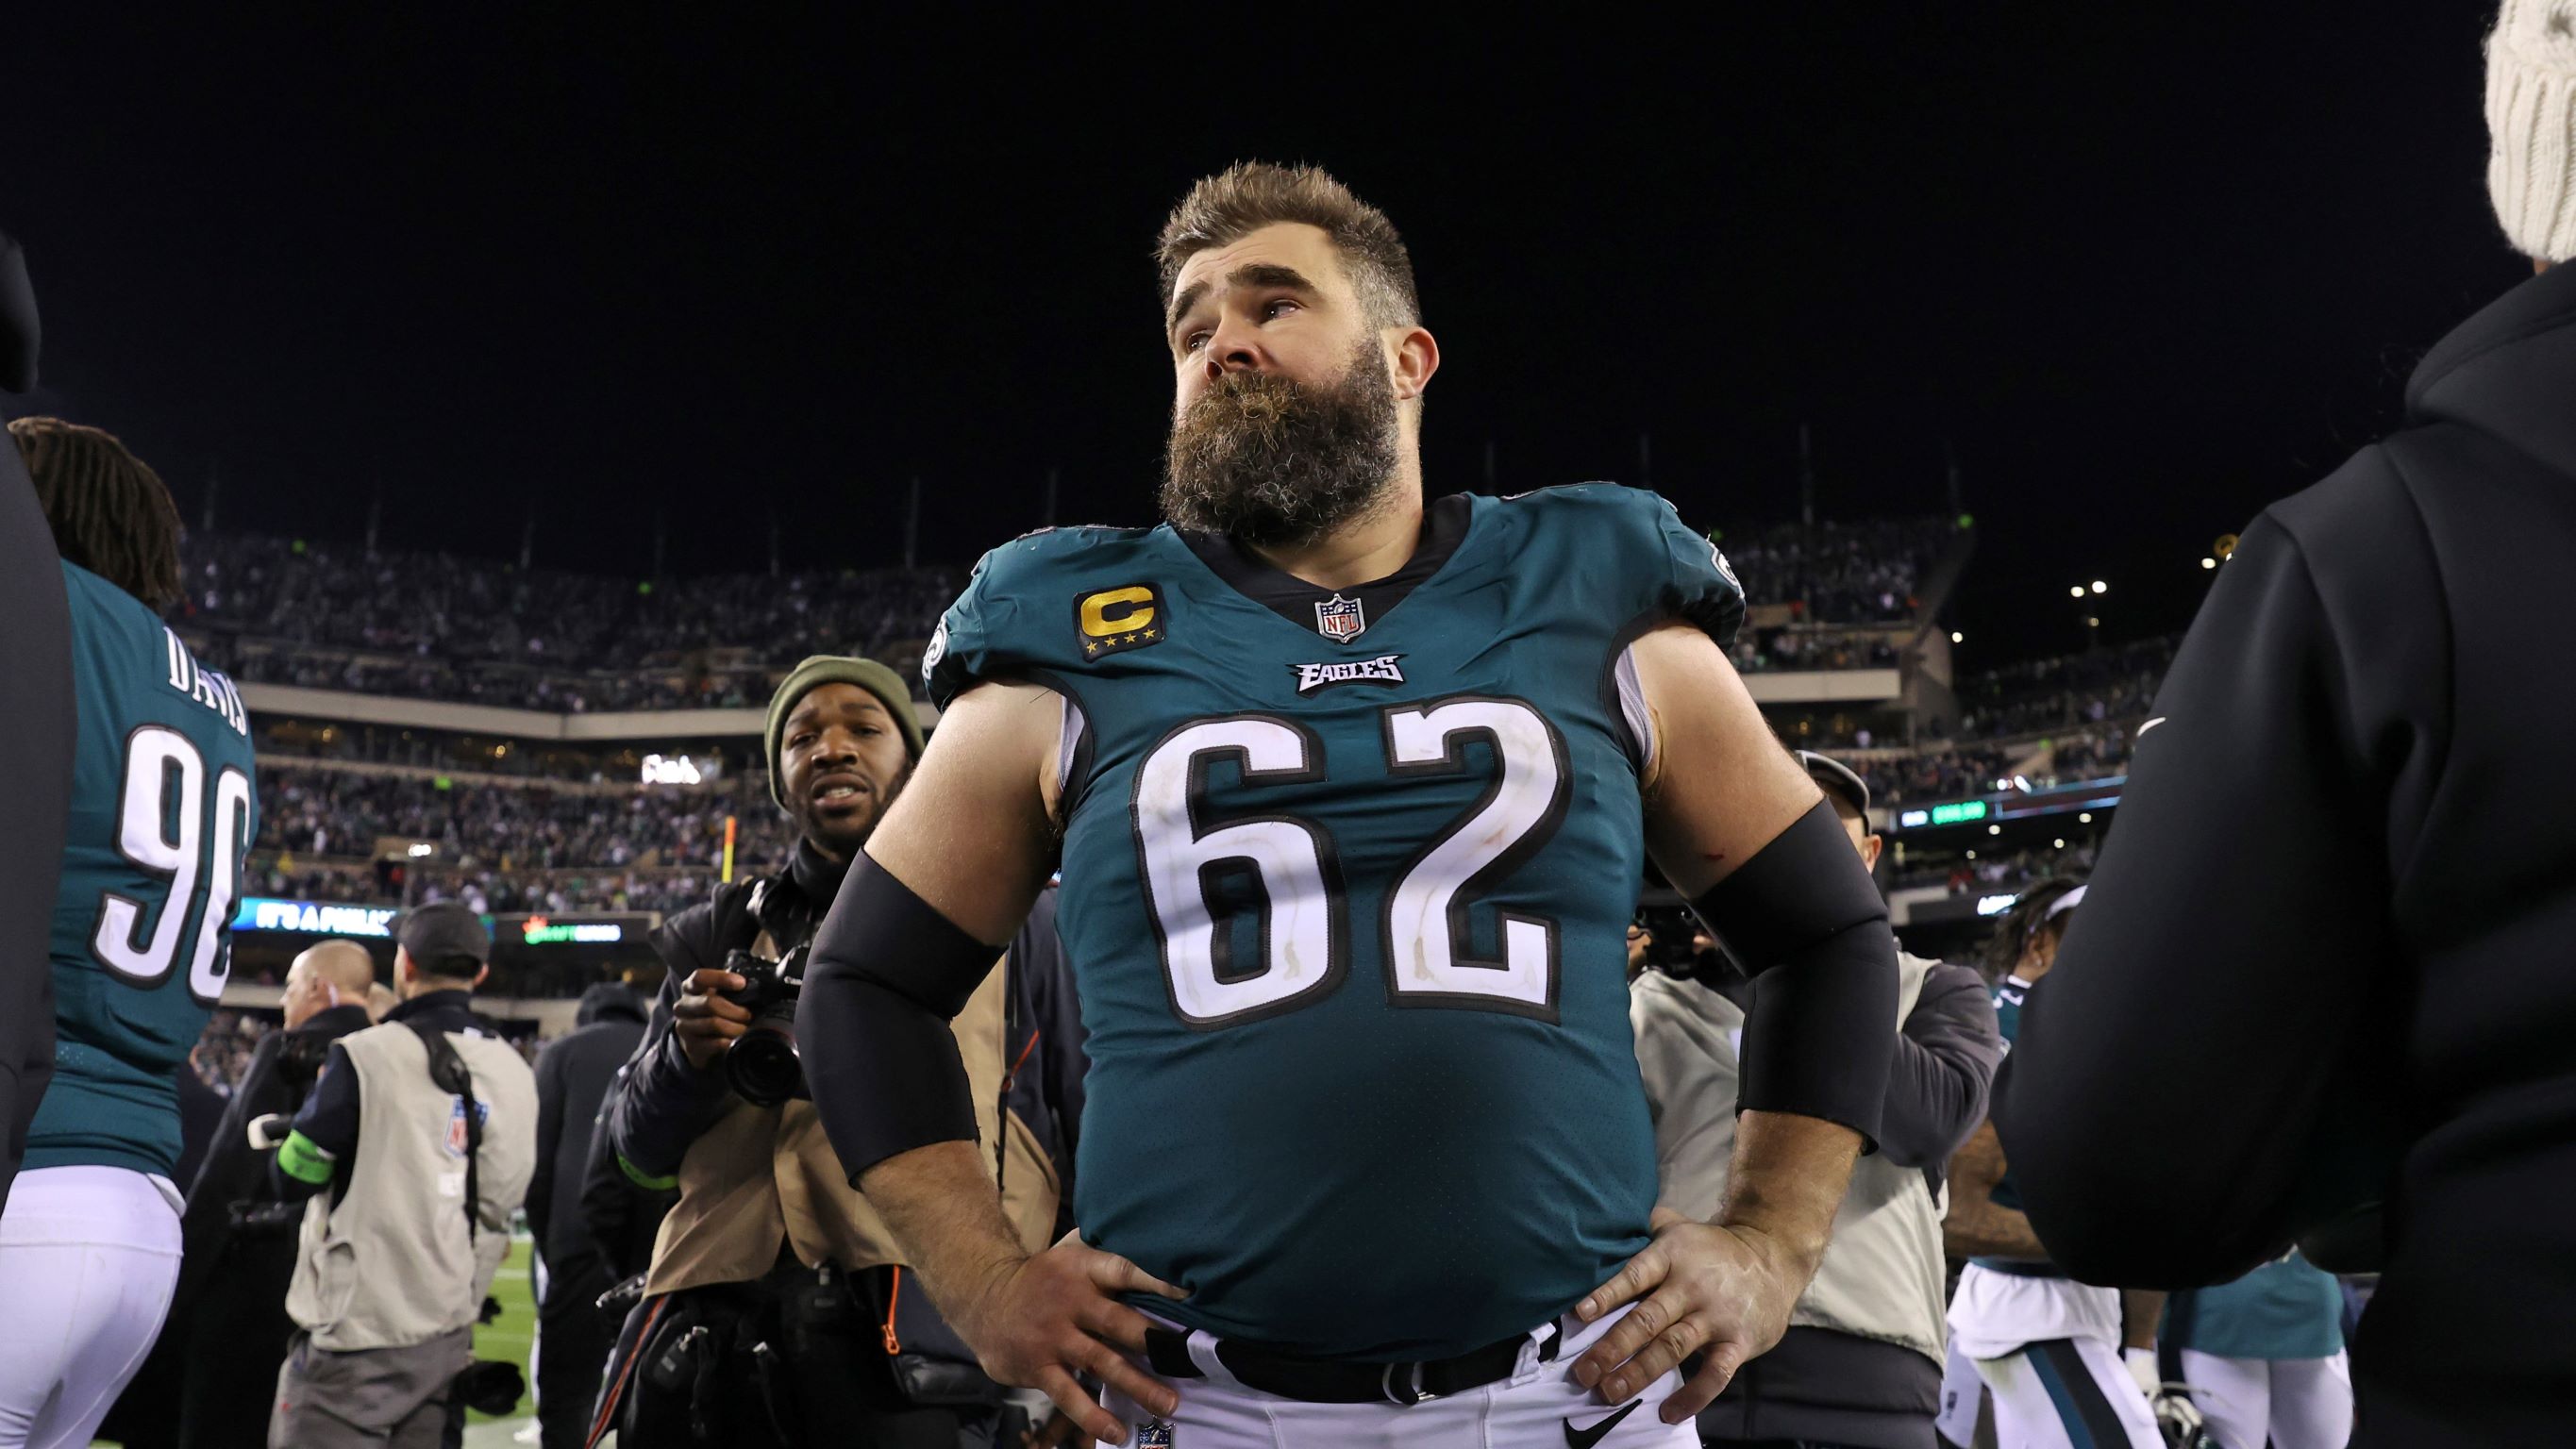 Philadelphia Eagles’ Jason Kelce to Hold Press Conference Regarding His Future – Report by NBC Sports